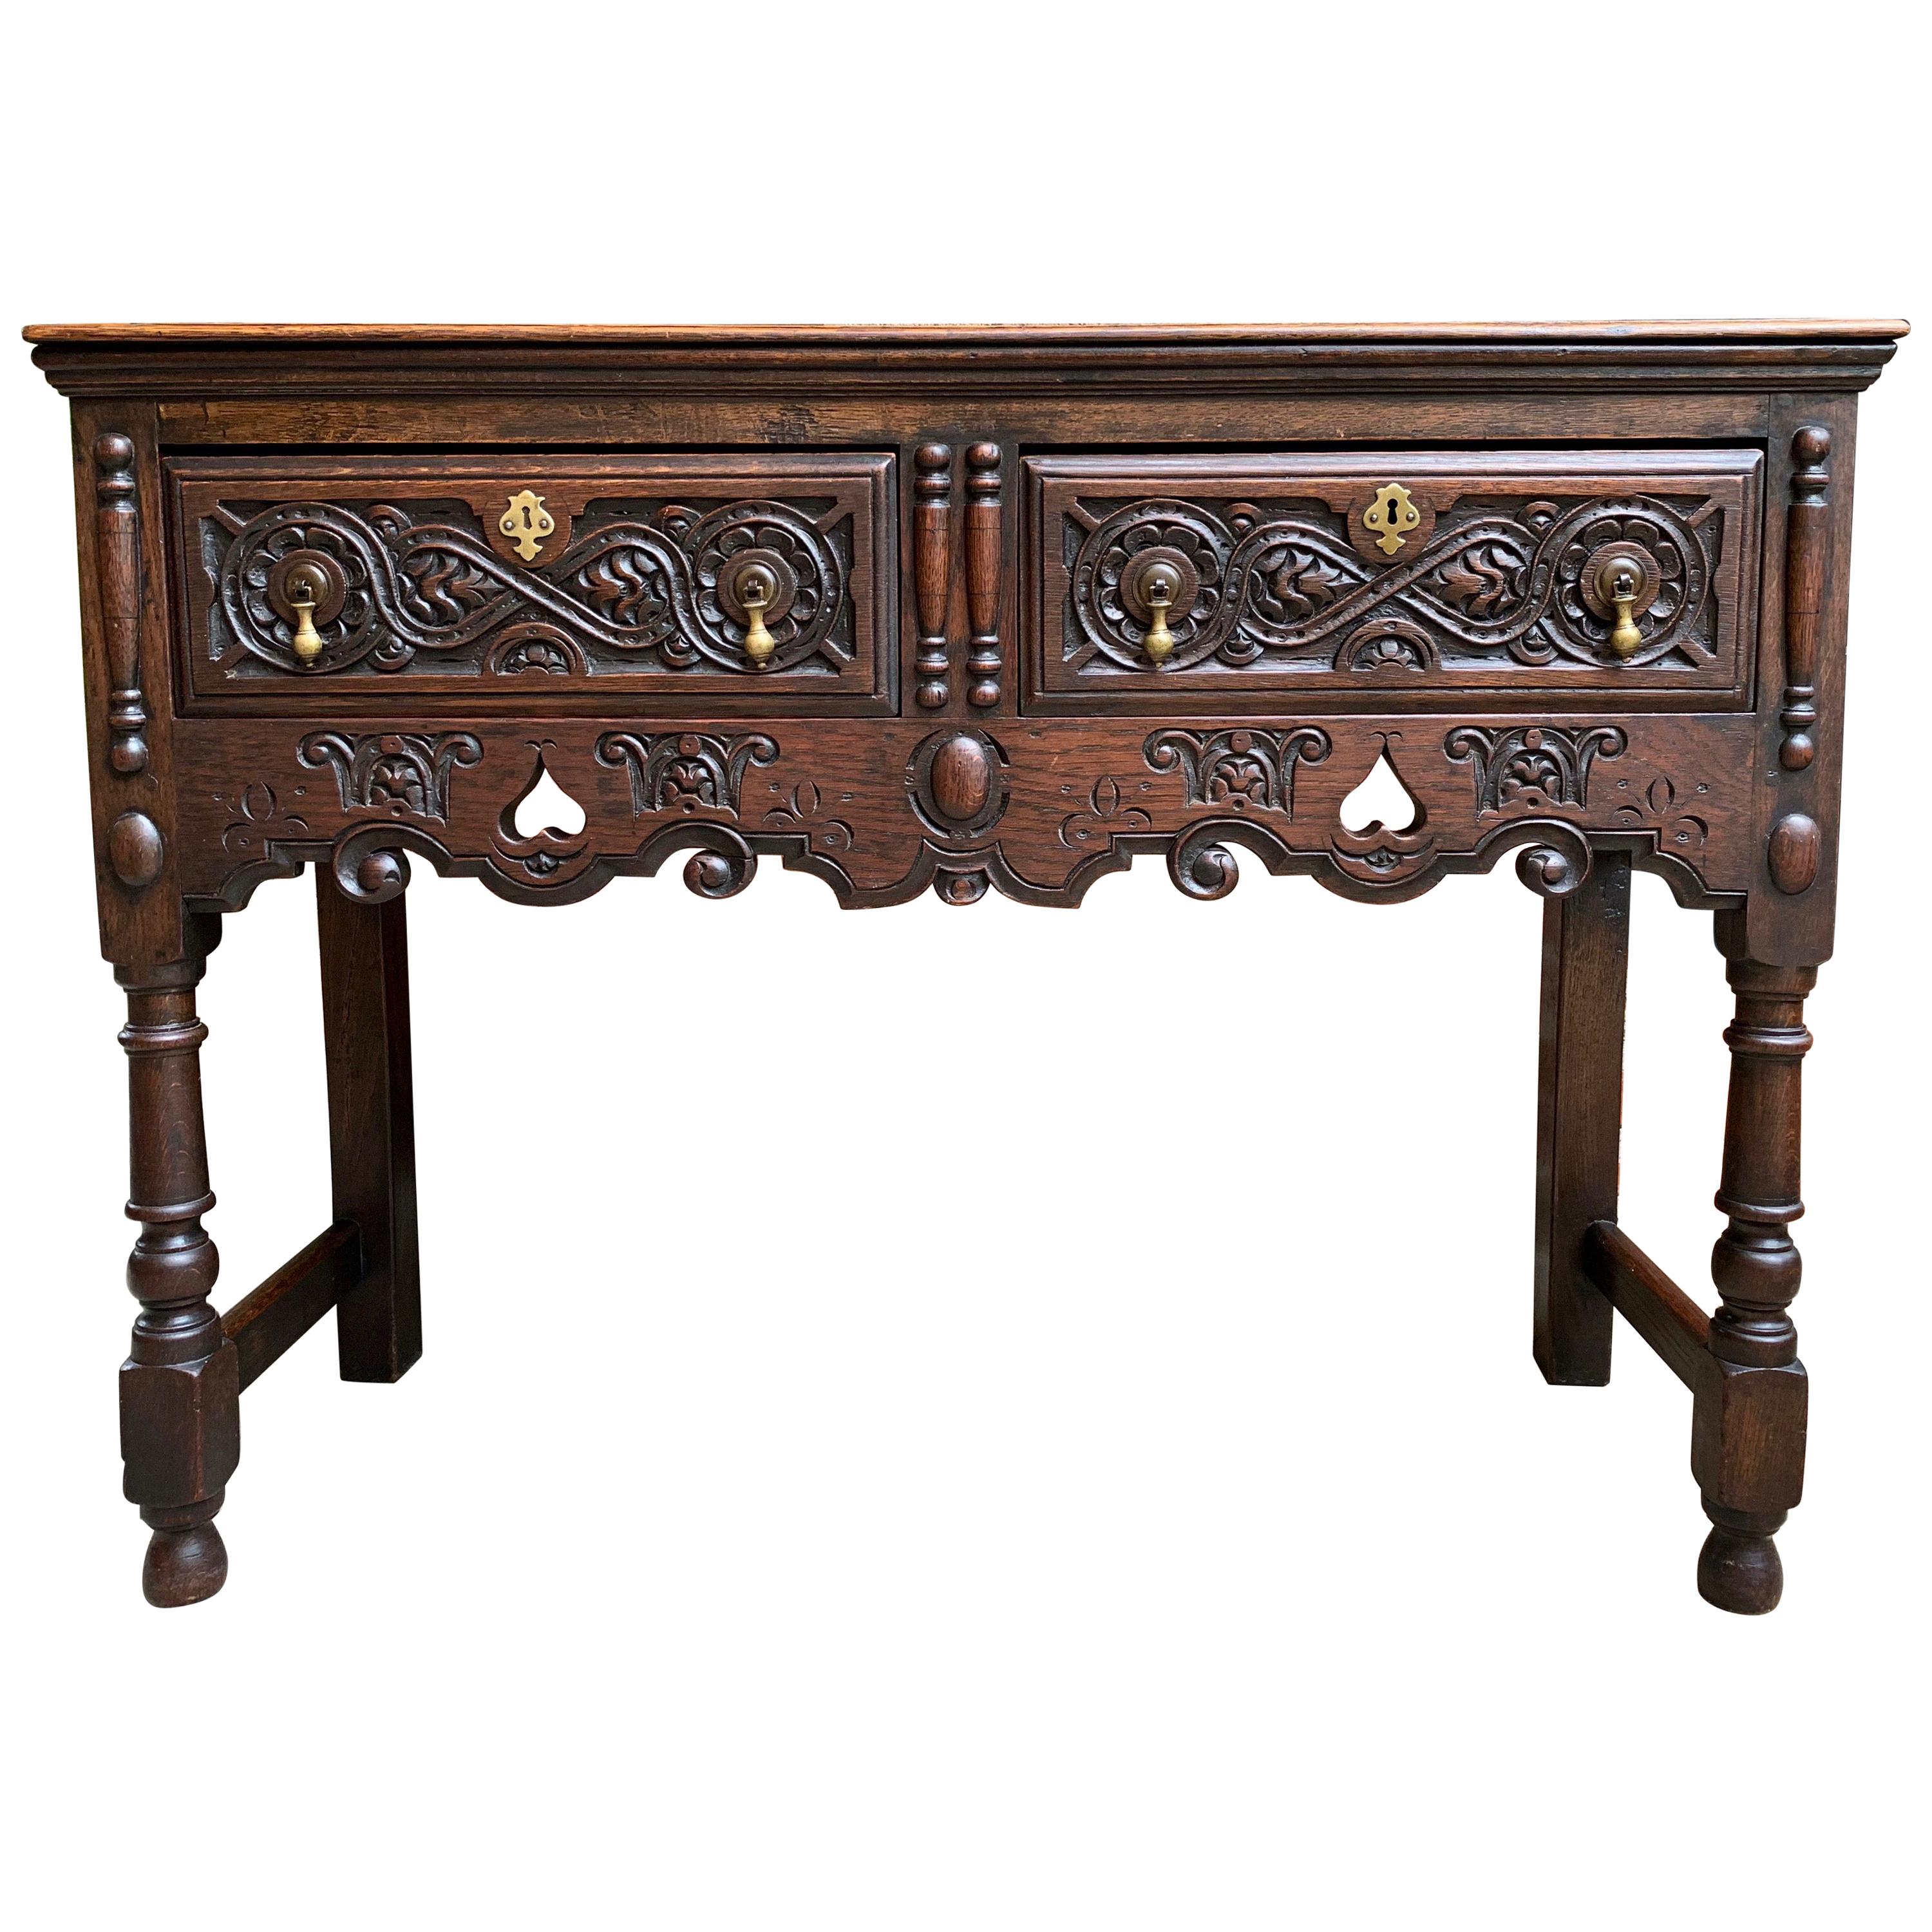 19th century English Carved Oak Hall Entry Sofa Table Sideboard Jacobean Small